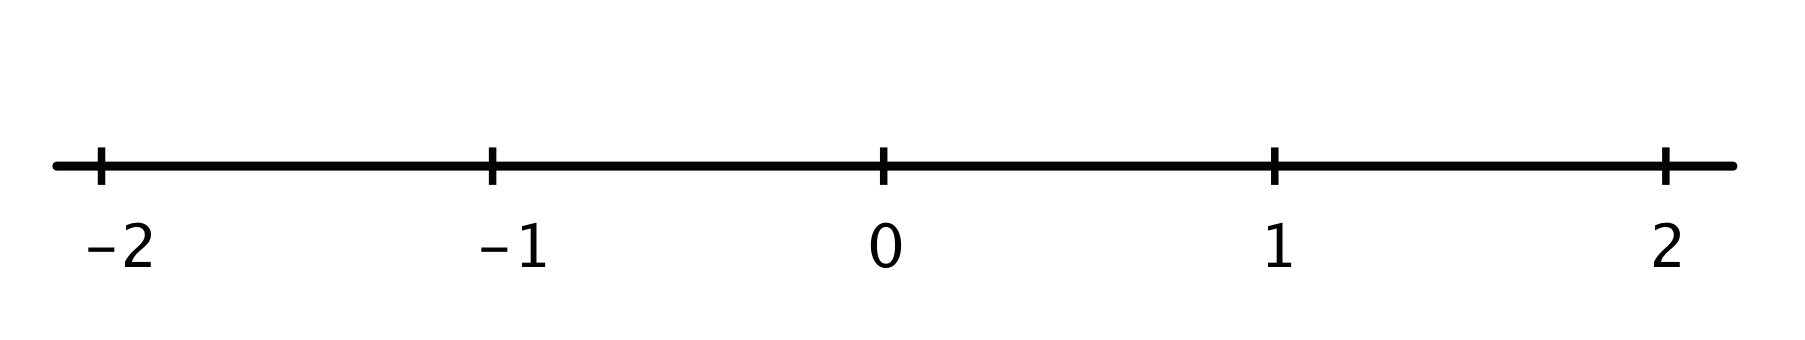 A number line with 5 evenly spaced tick marks, labeled negative 2 through 2.